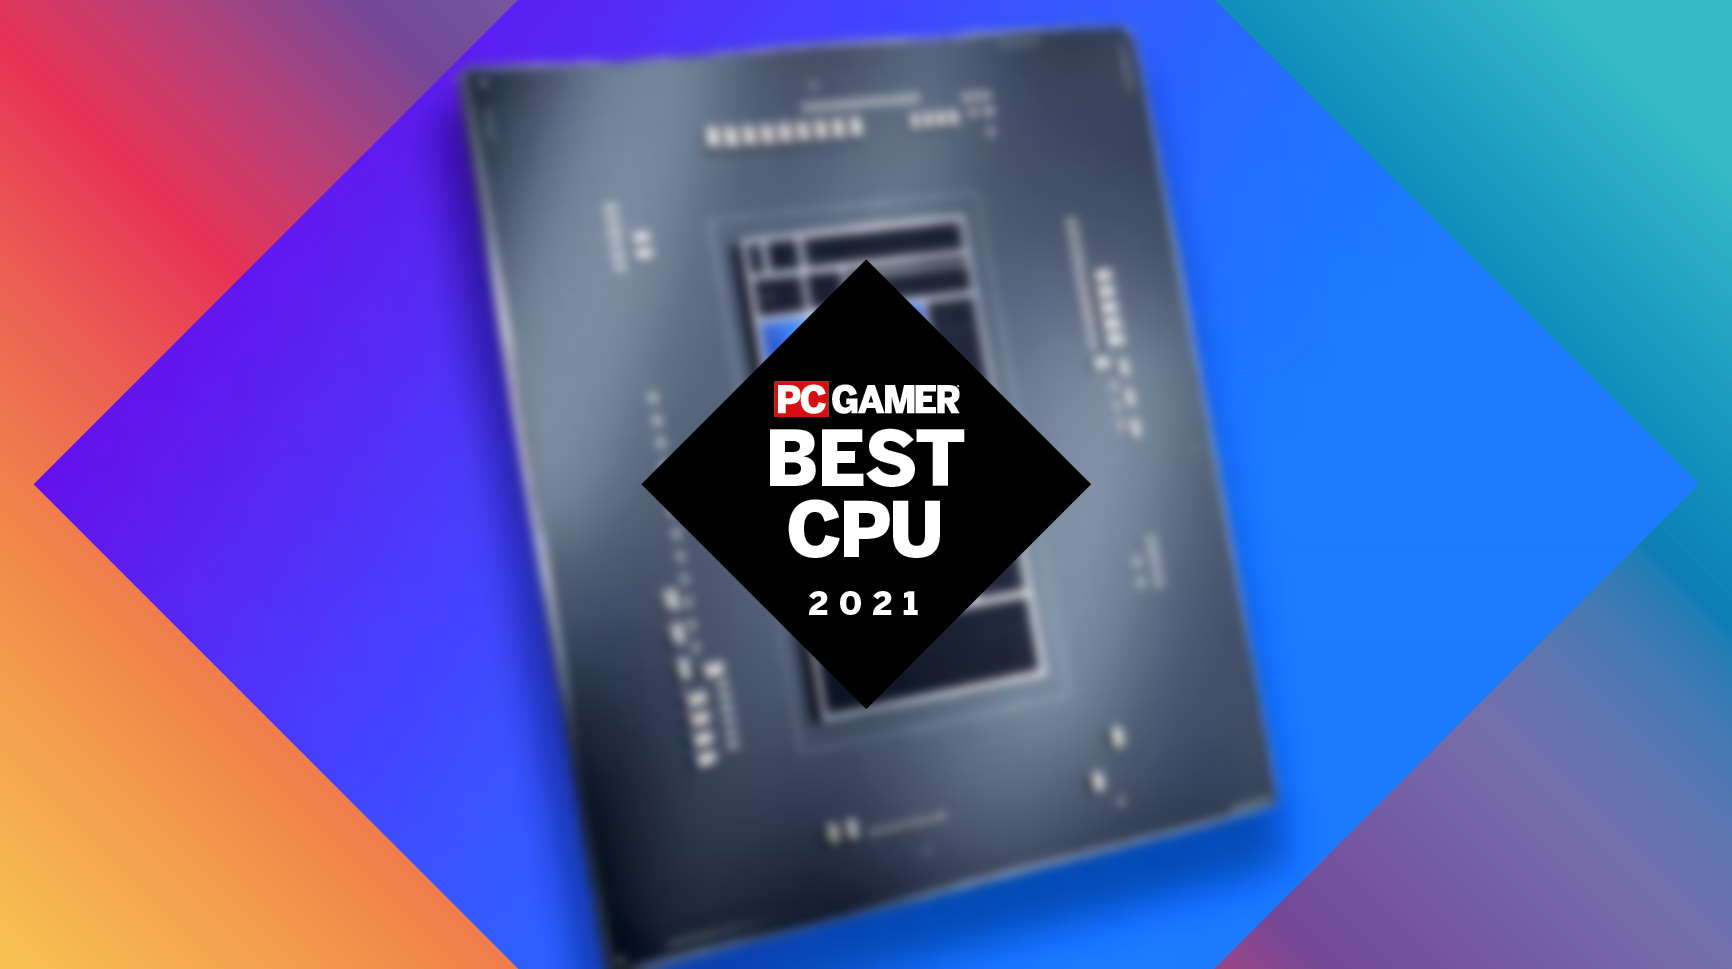  PC Gamer Hardware Awards: What is the best CPU of 2021? 